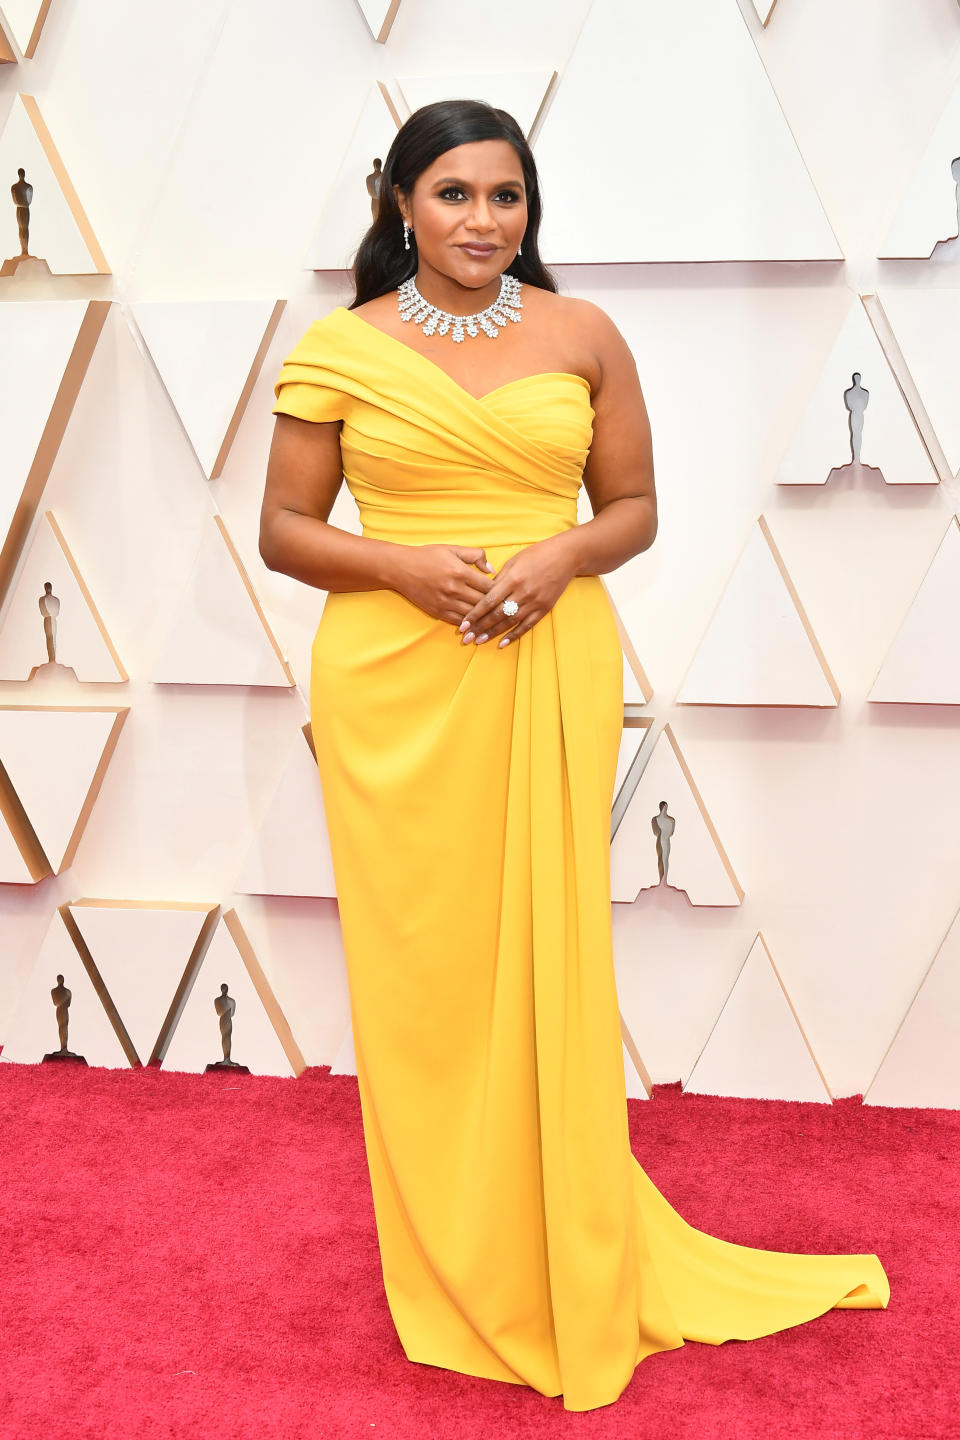 Kaling brought the glamour in a one-shoulder canary yellow Dolce & Gabbana gown. The "Late Night" writer and actress is set to take the stage as an Oscars presenter.